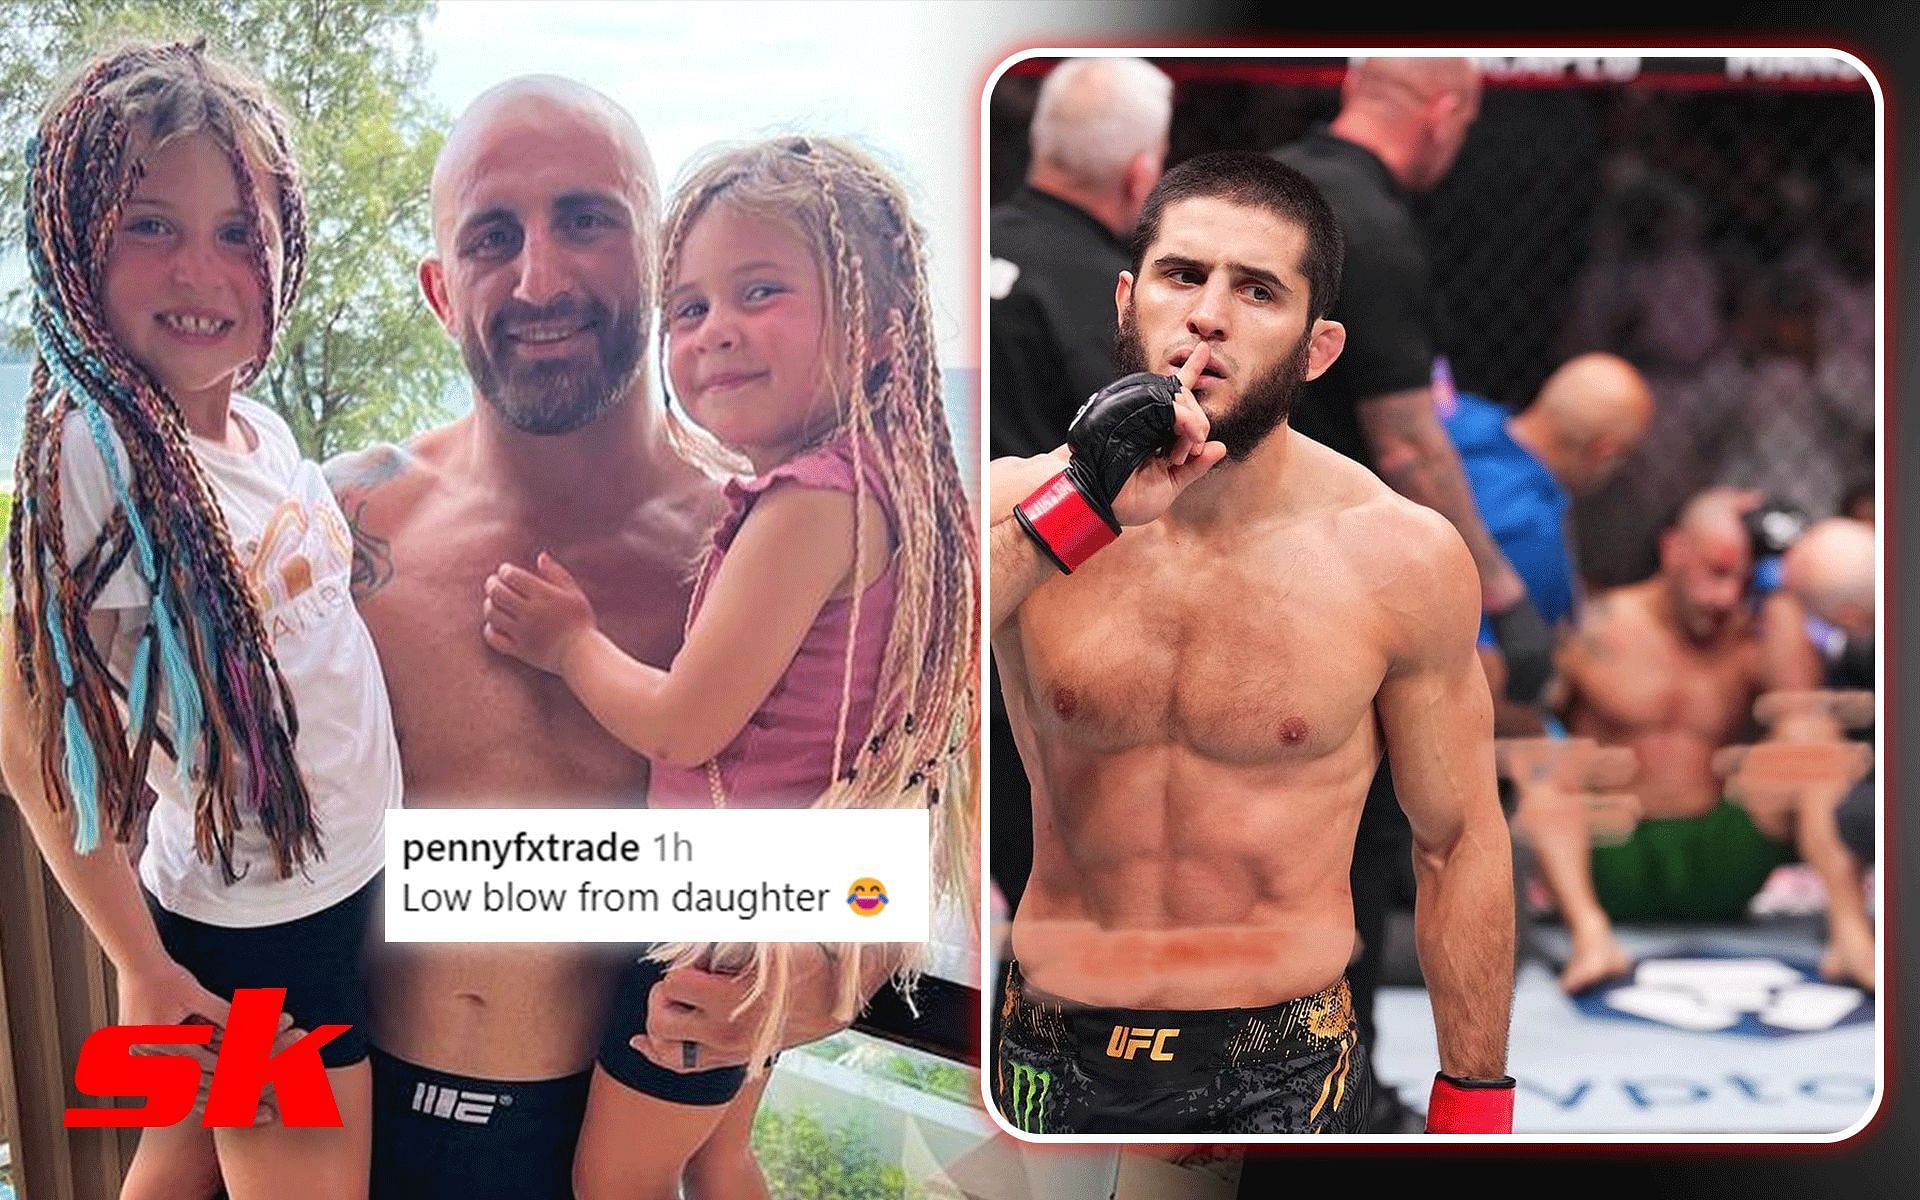 Fans react to Alexander Volkanovski (left) getting trolled by his daughter for Islam Makhachev (right) loss [Image via: @alexvolkanovski and @islam_makhachev on Instagram]